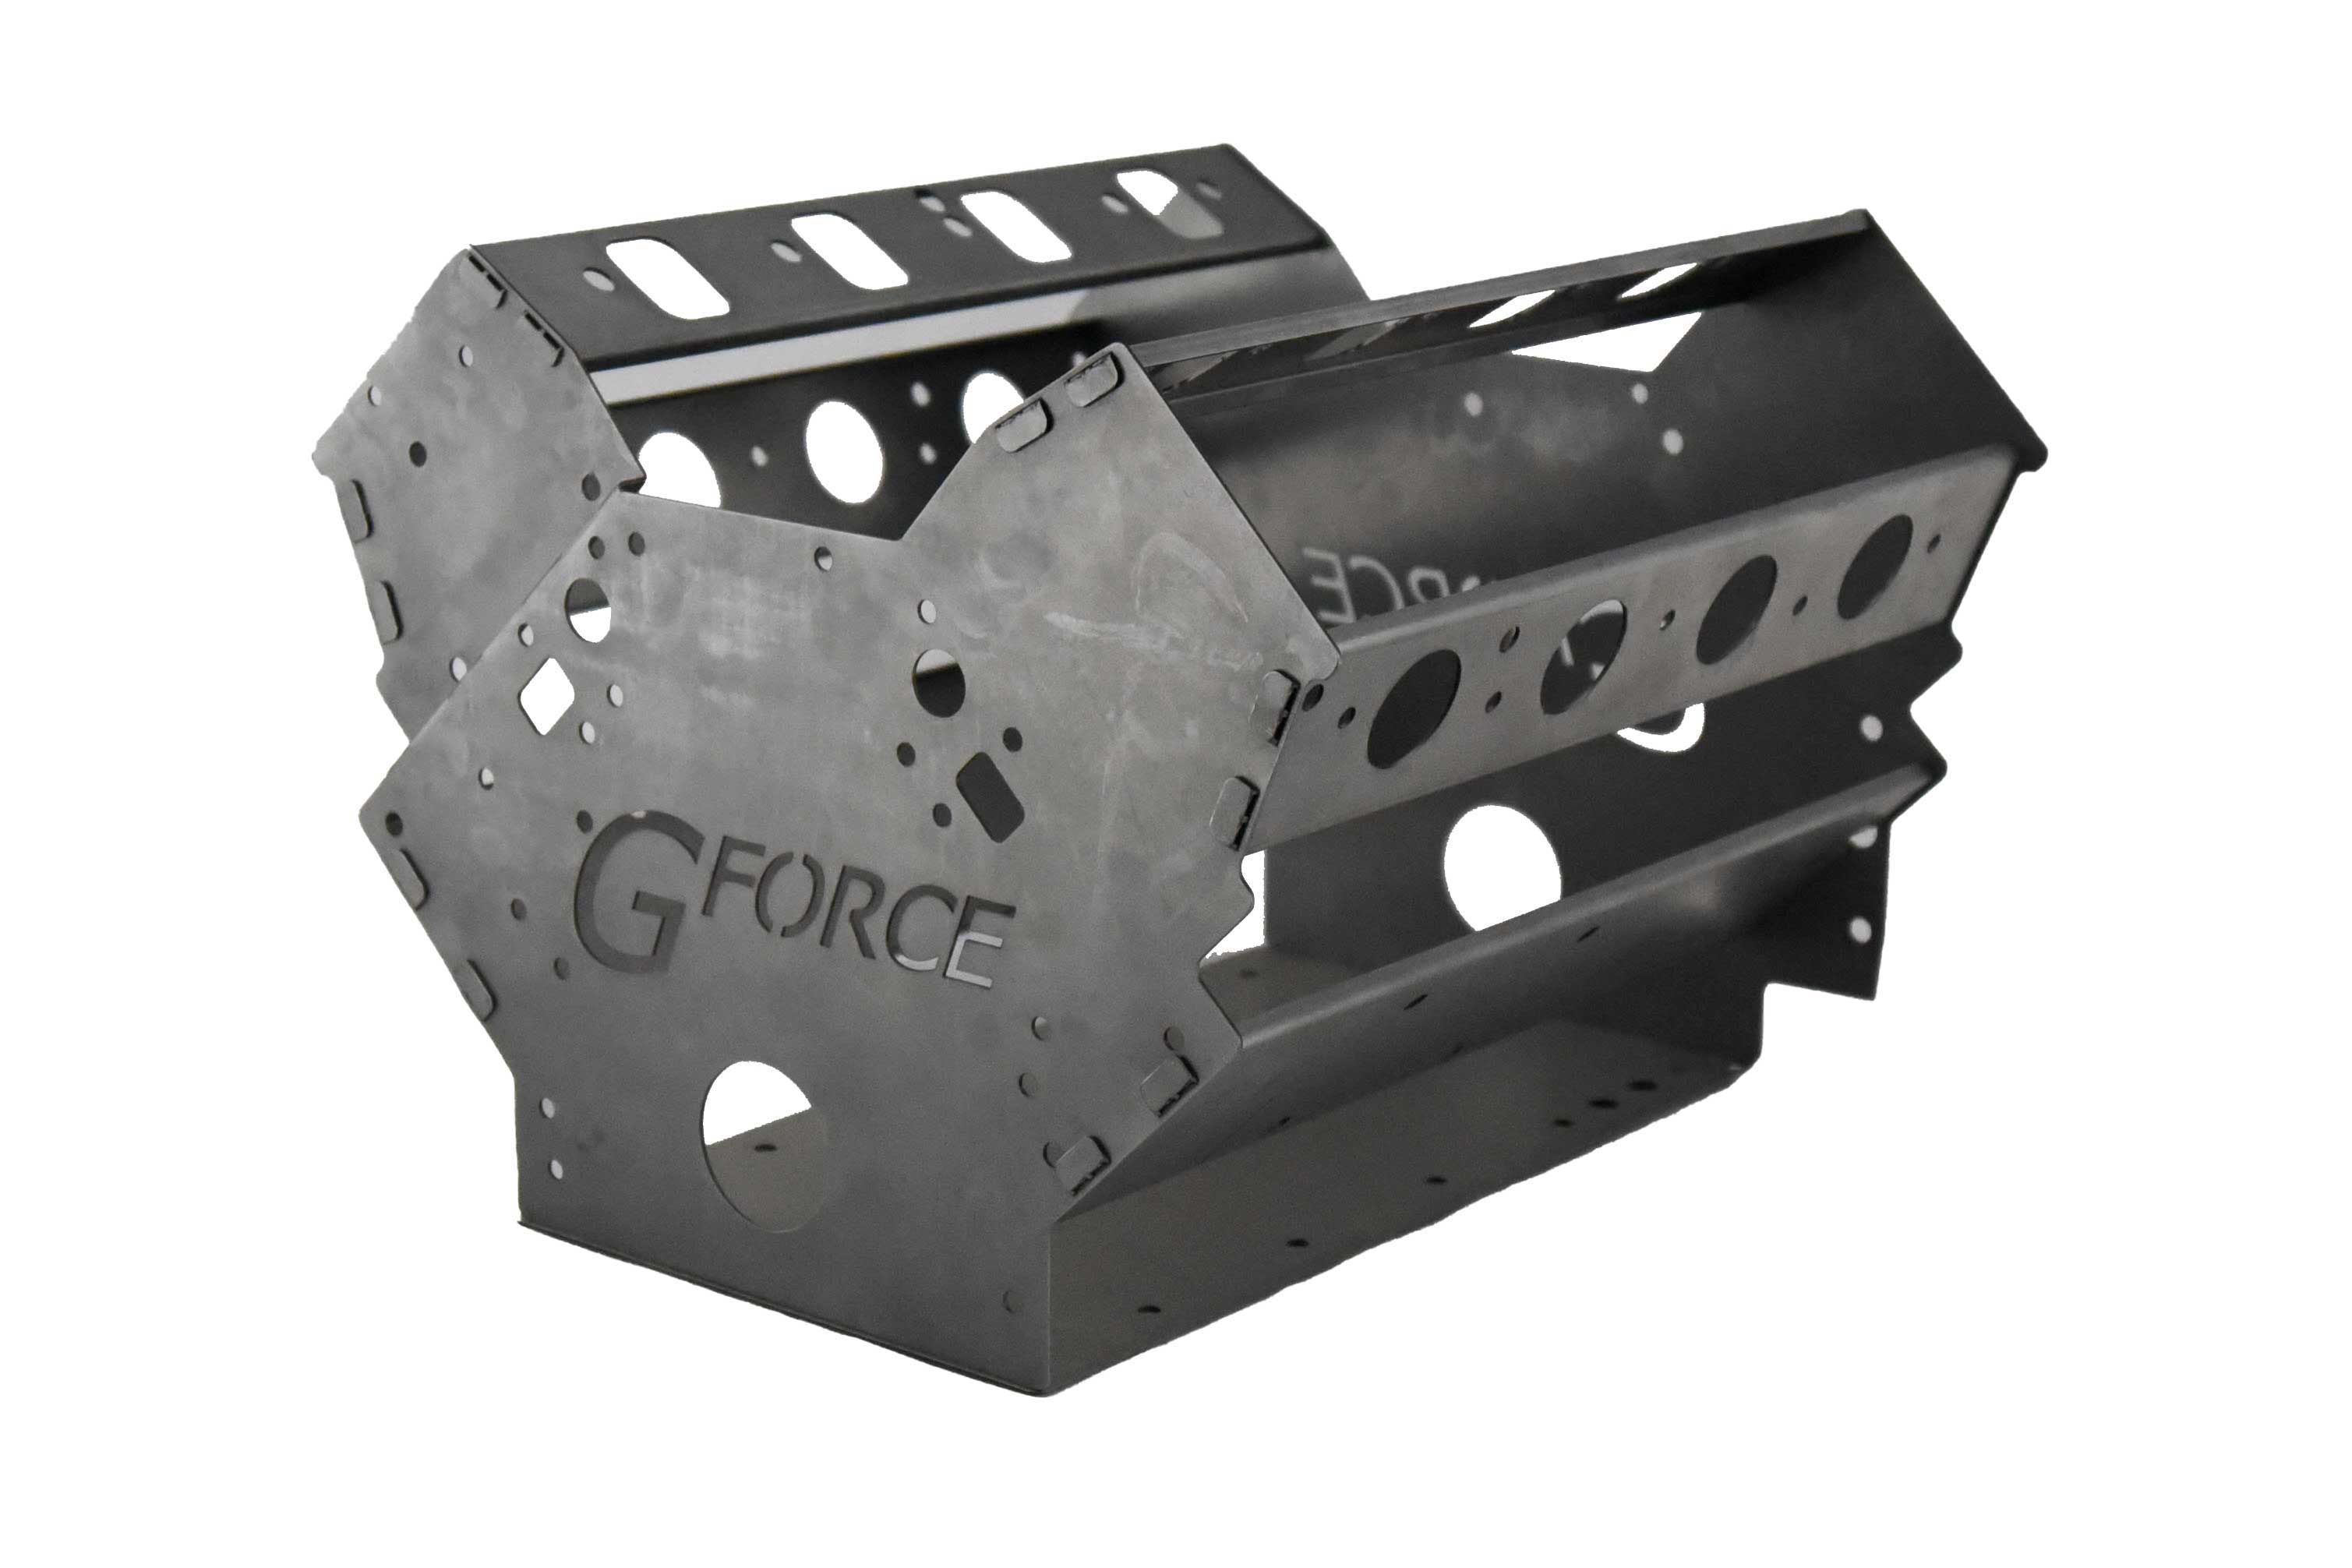 LT Engine MockUp Block Swap Block™ from G Force front view